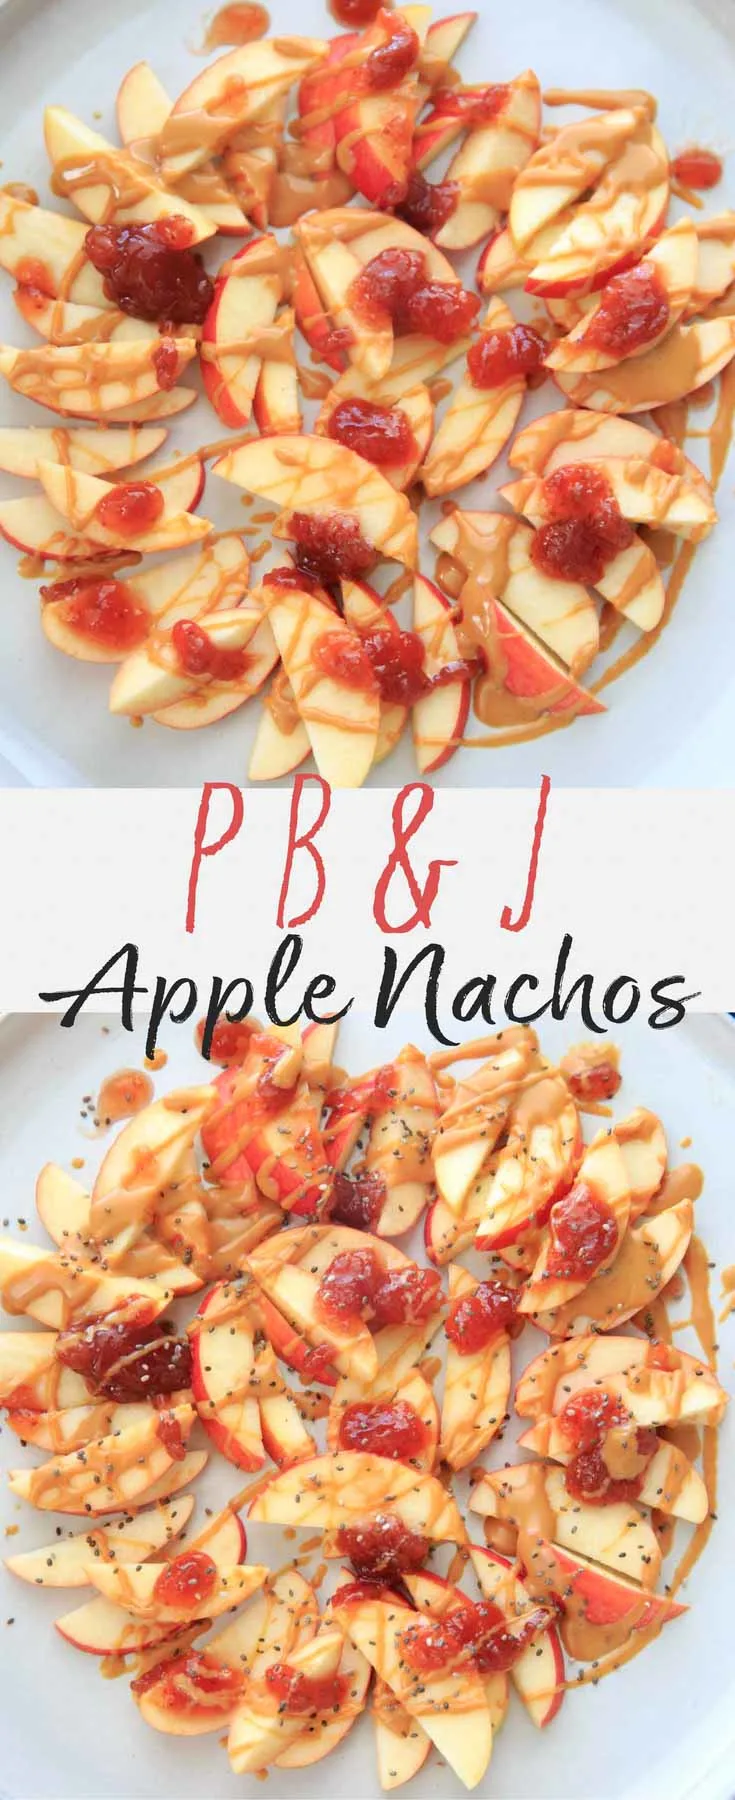 This peanut butter jelly combo on apple nachos is the perfect quick and healthy snack for kids and adults alike! Vegan, gluten-free, protein-packed, no-bake delicious treat.